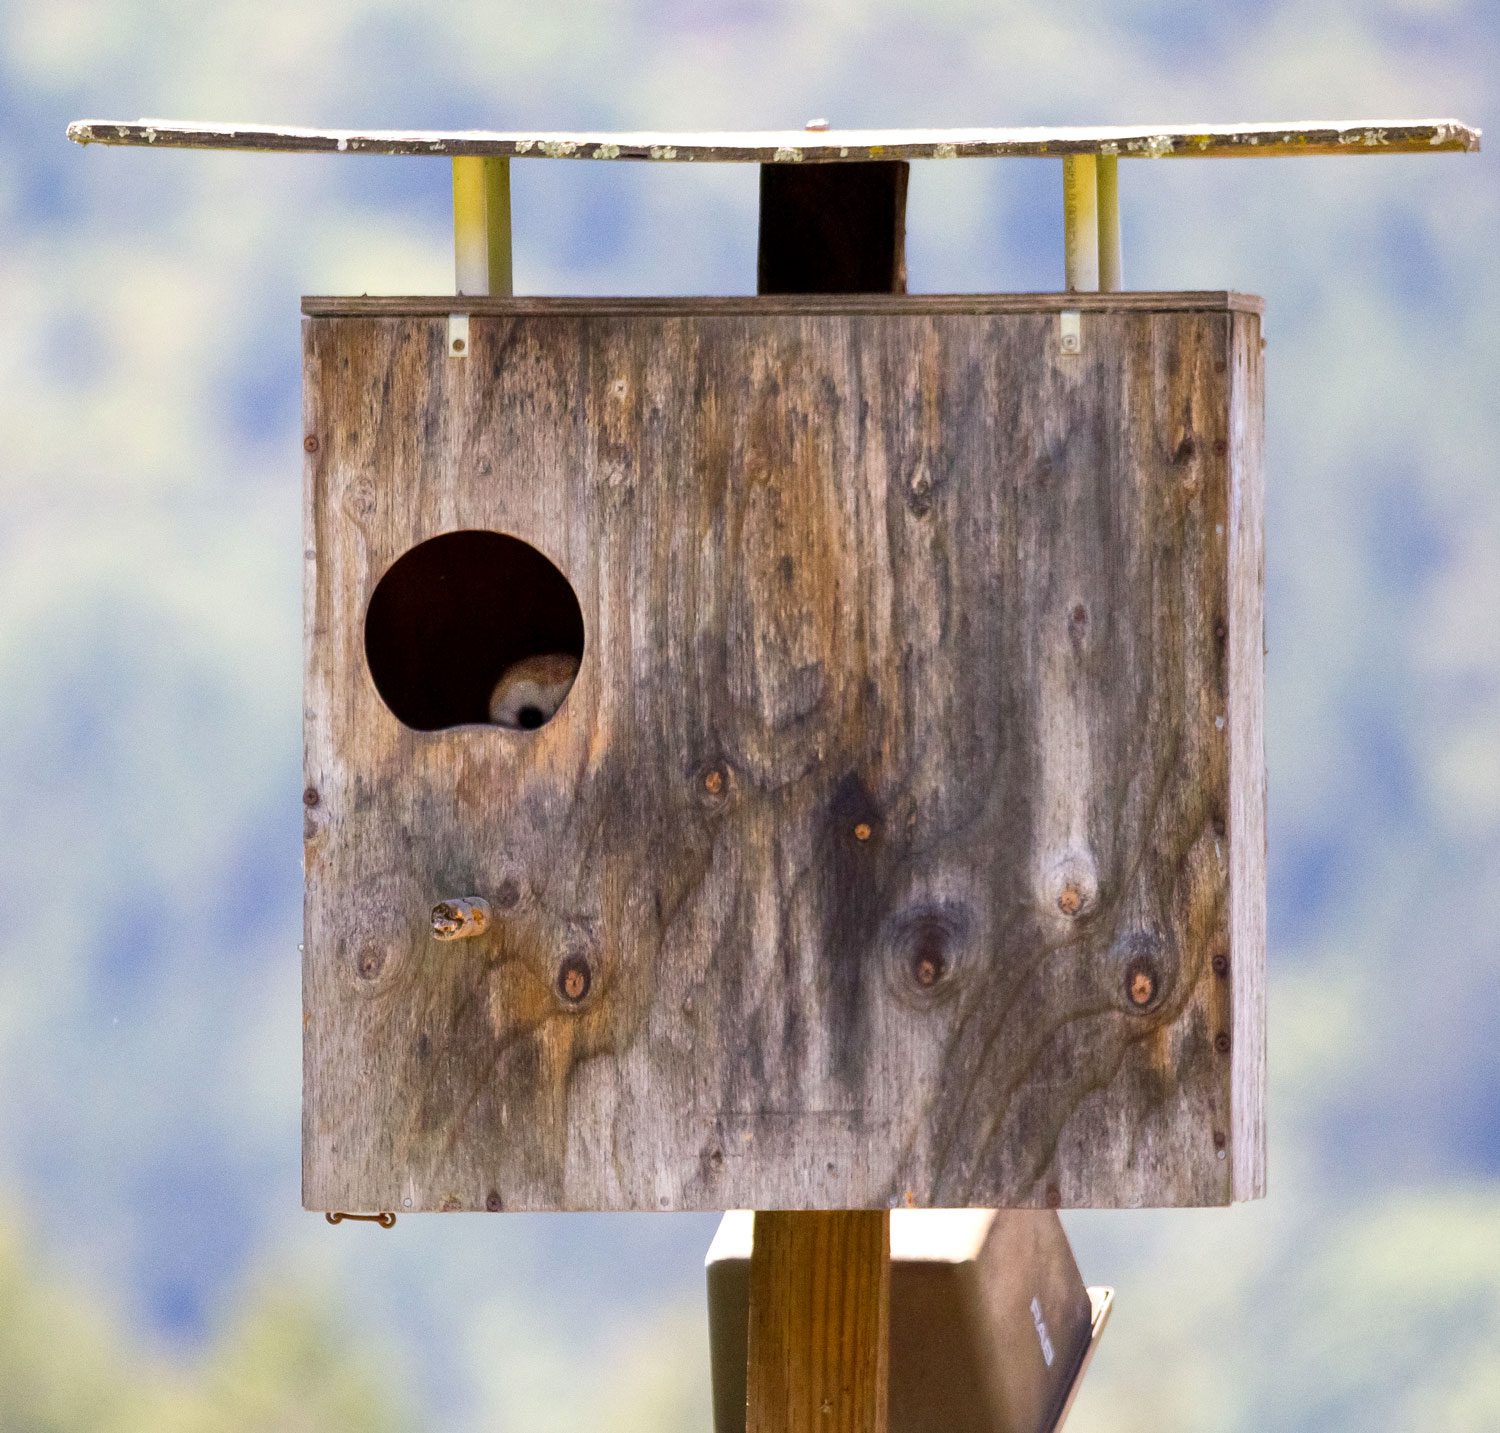 In California’s Sonoma Valley, Barn Owl nest boxes are a common sight among the vineyards. Photo by Ryan Bourbour.